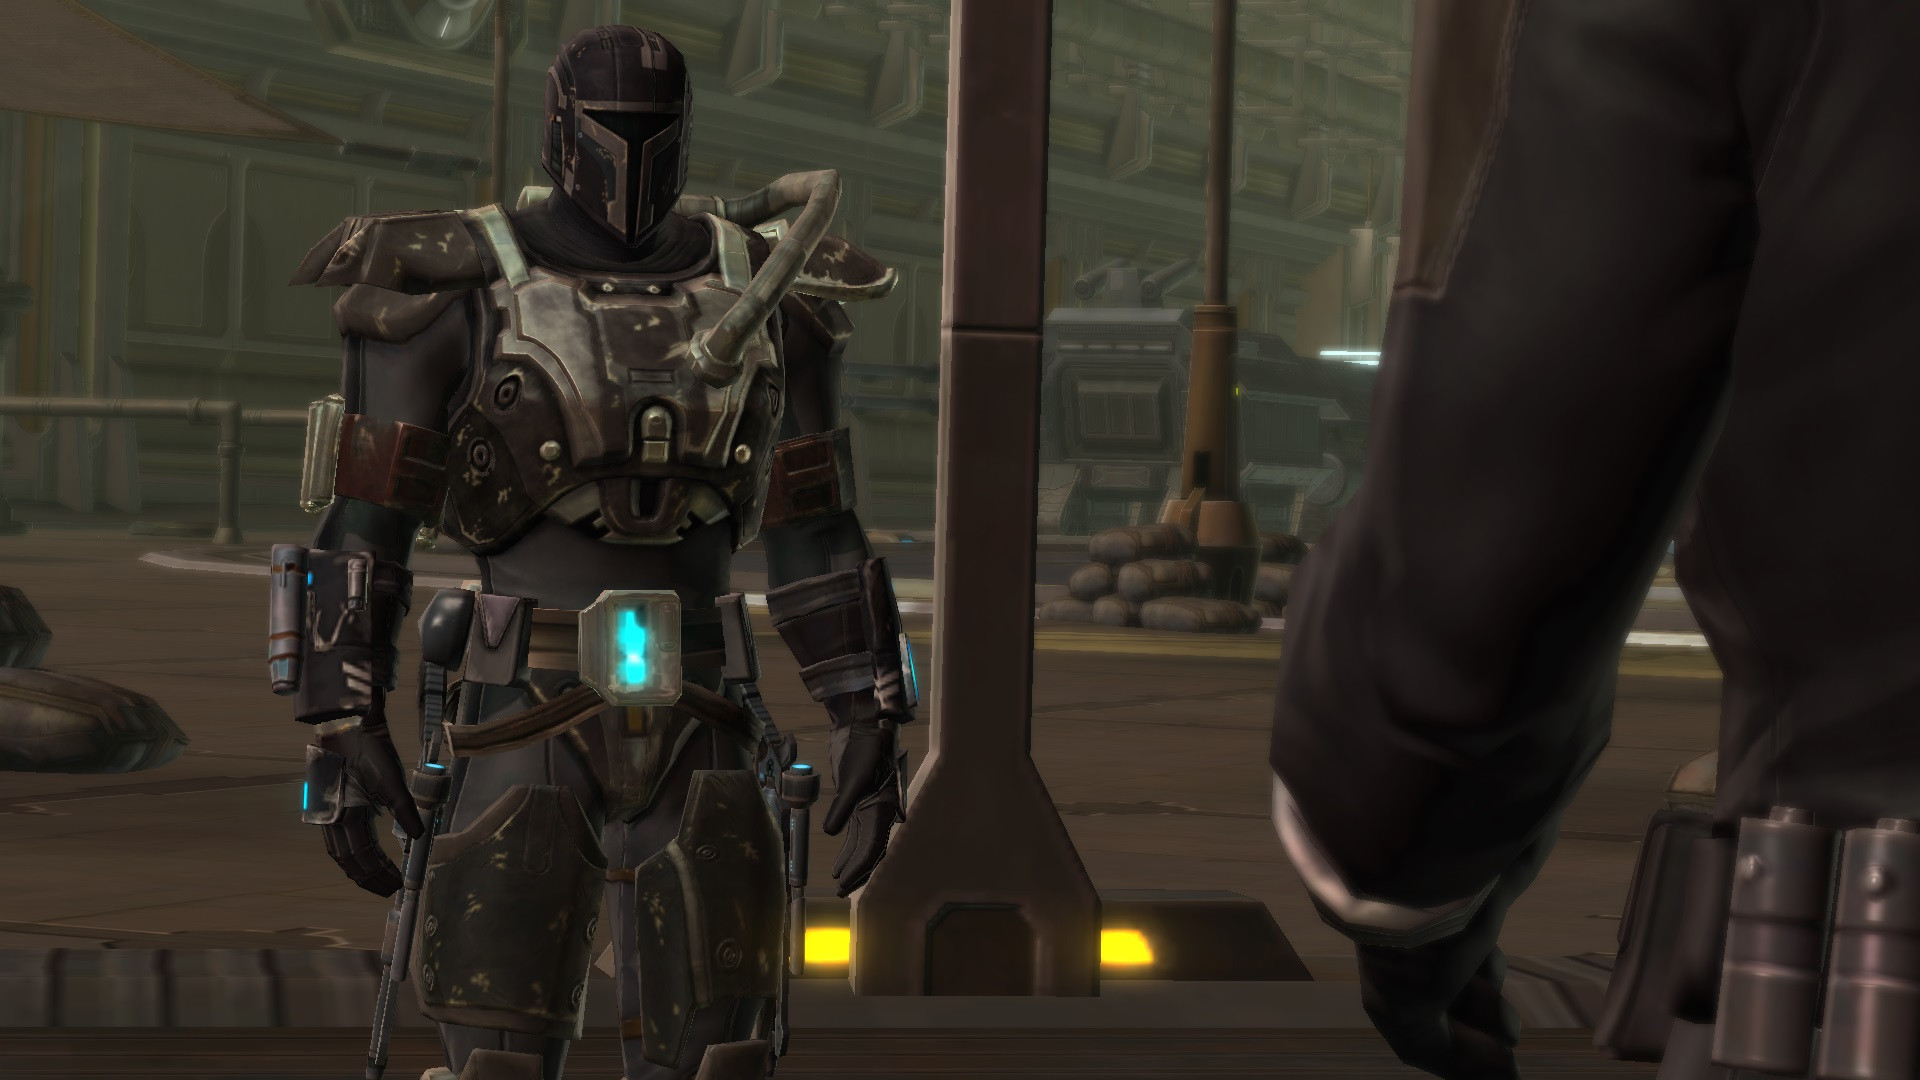 bounty hunter wallpaper displaying 13 images for swtor bounty hunter 1920x1080